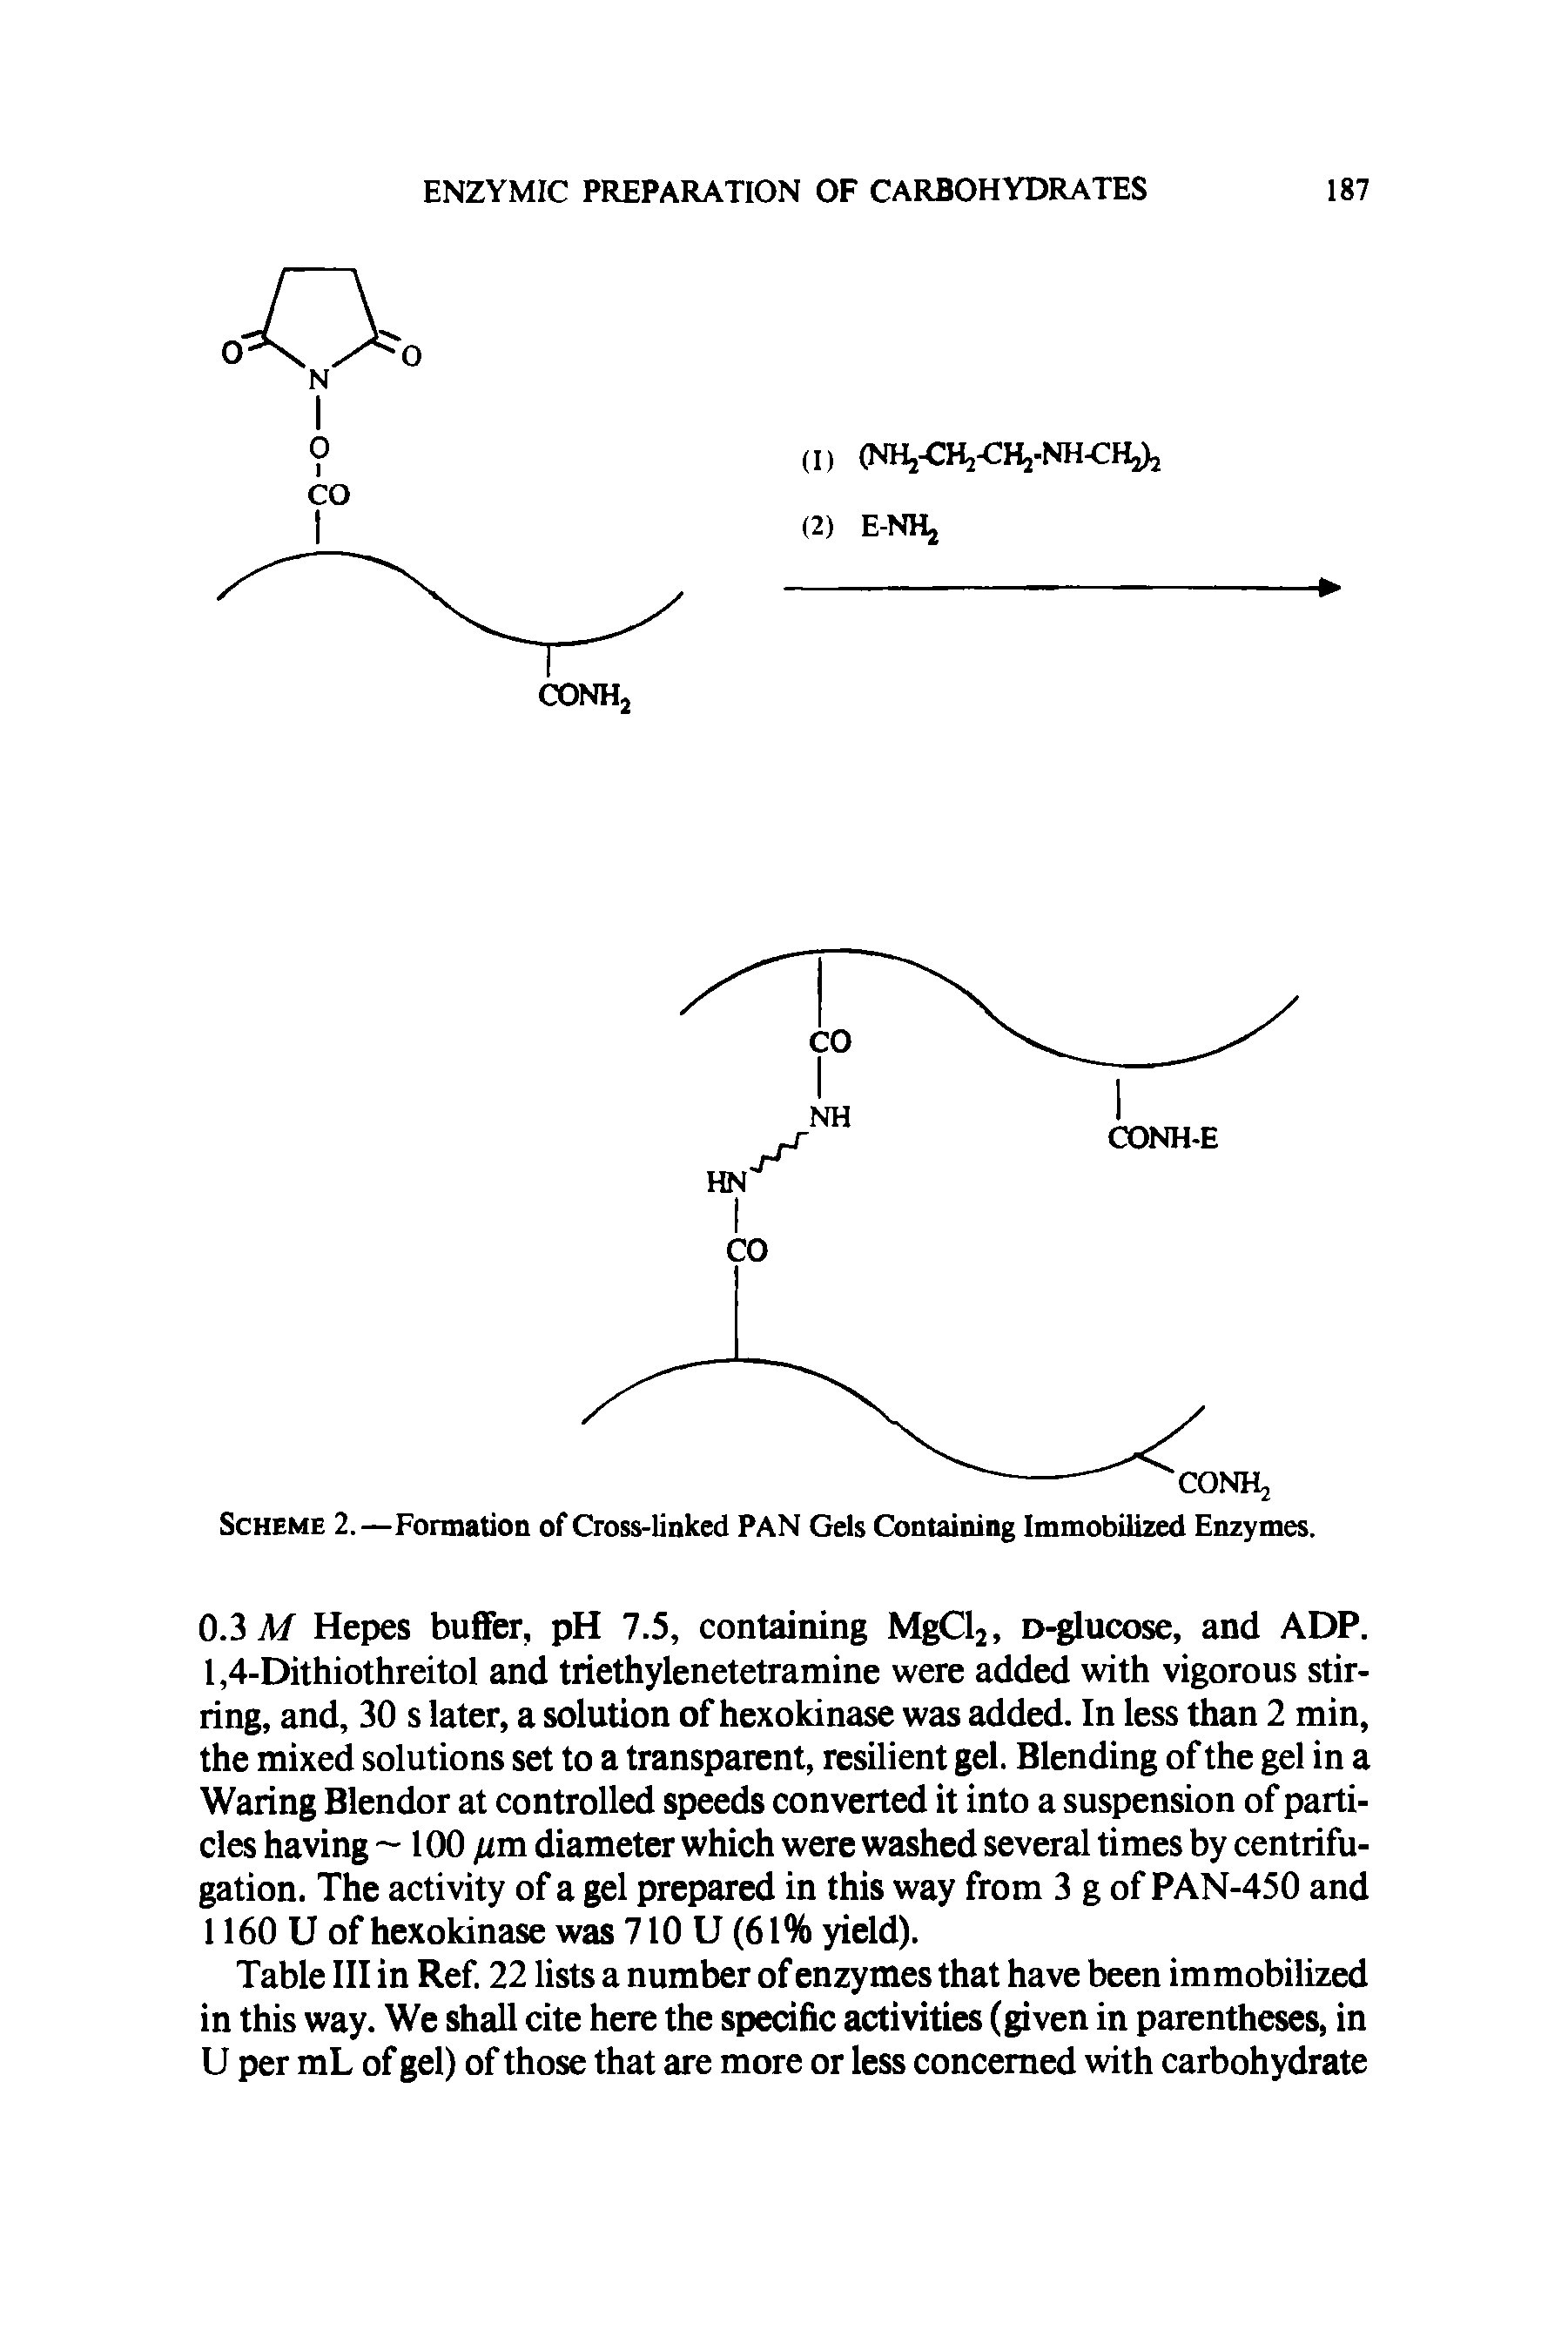 Scheme 2.—Formation of Cross-linked PAN Gels Containing Immobilized Enzymes.